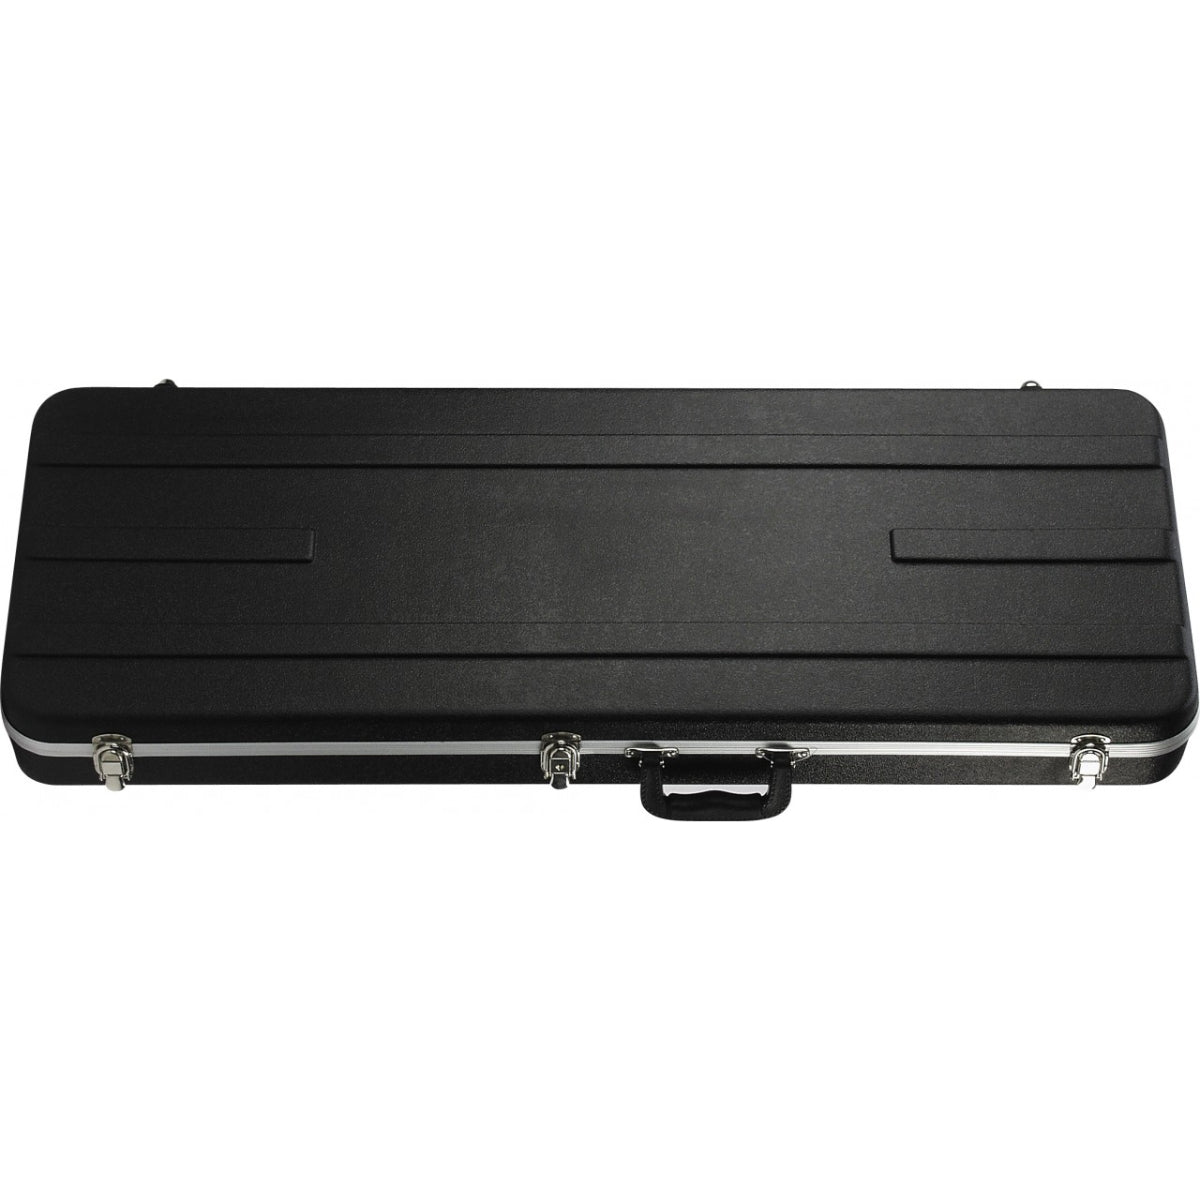 ABS-RE 2 ABS BASIC ELECTRIC RECTANGULAR CASE